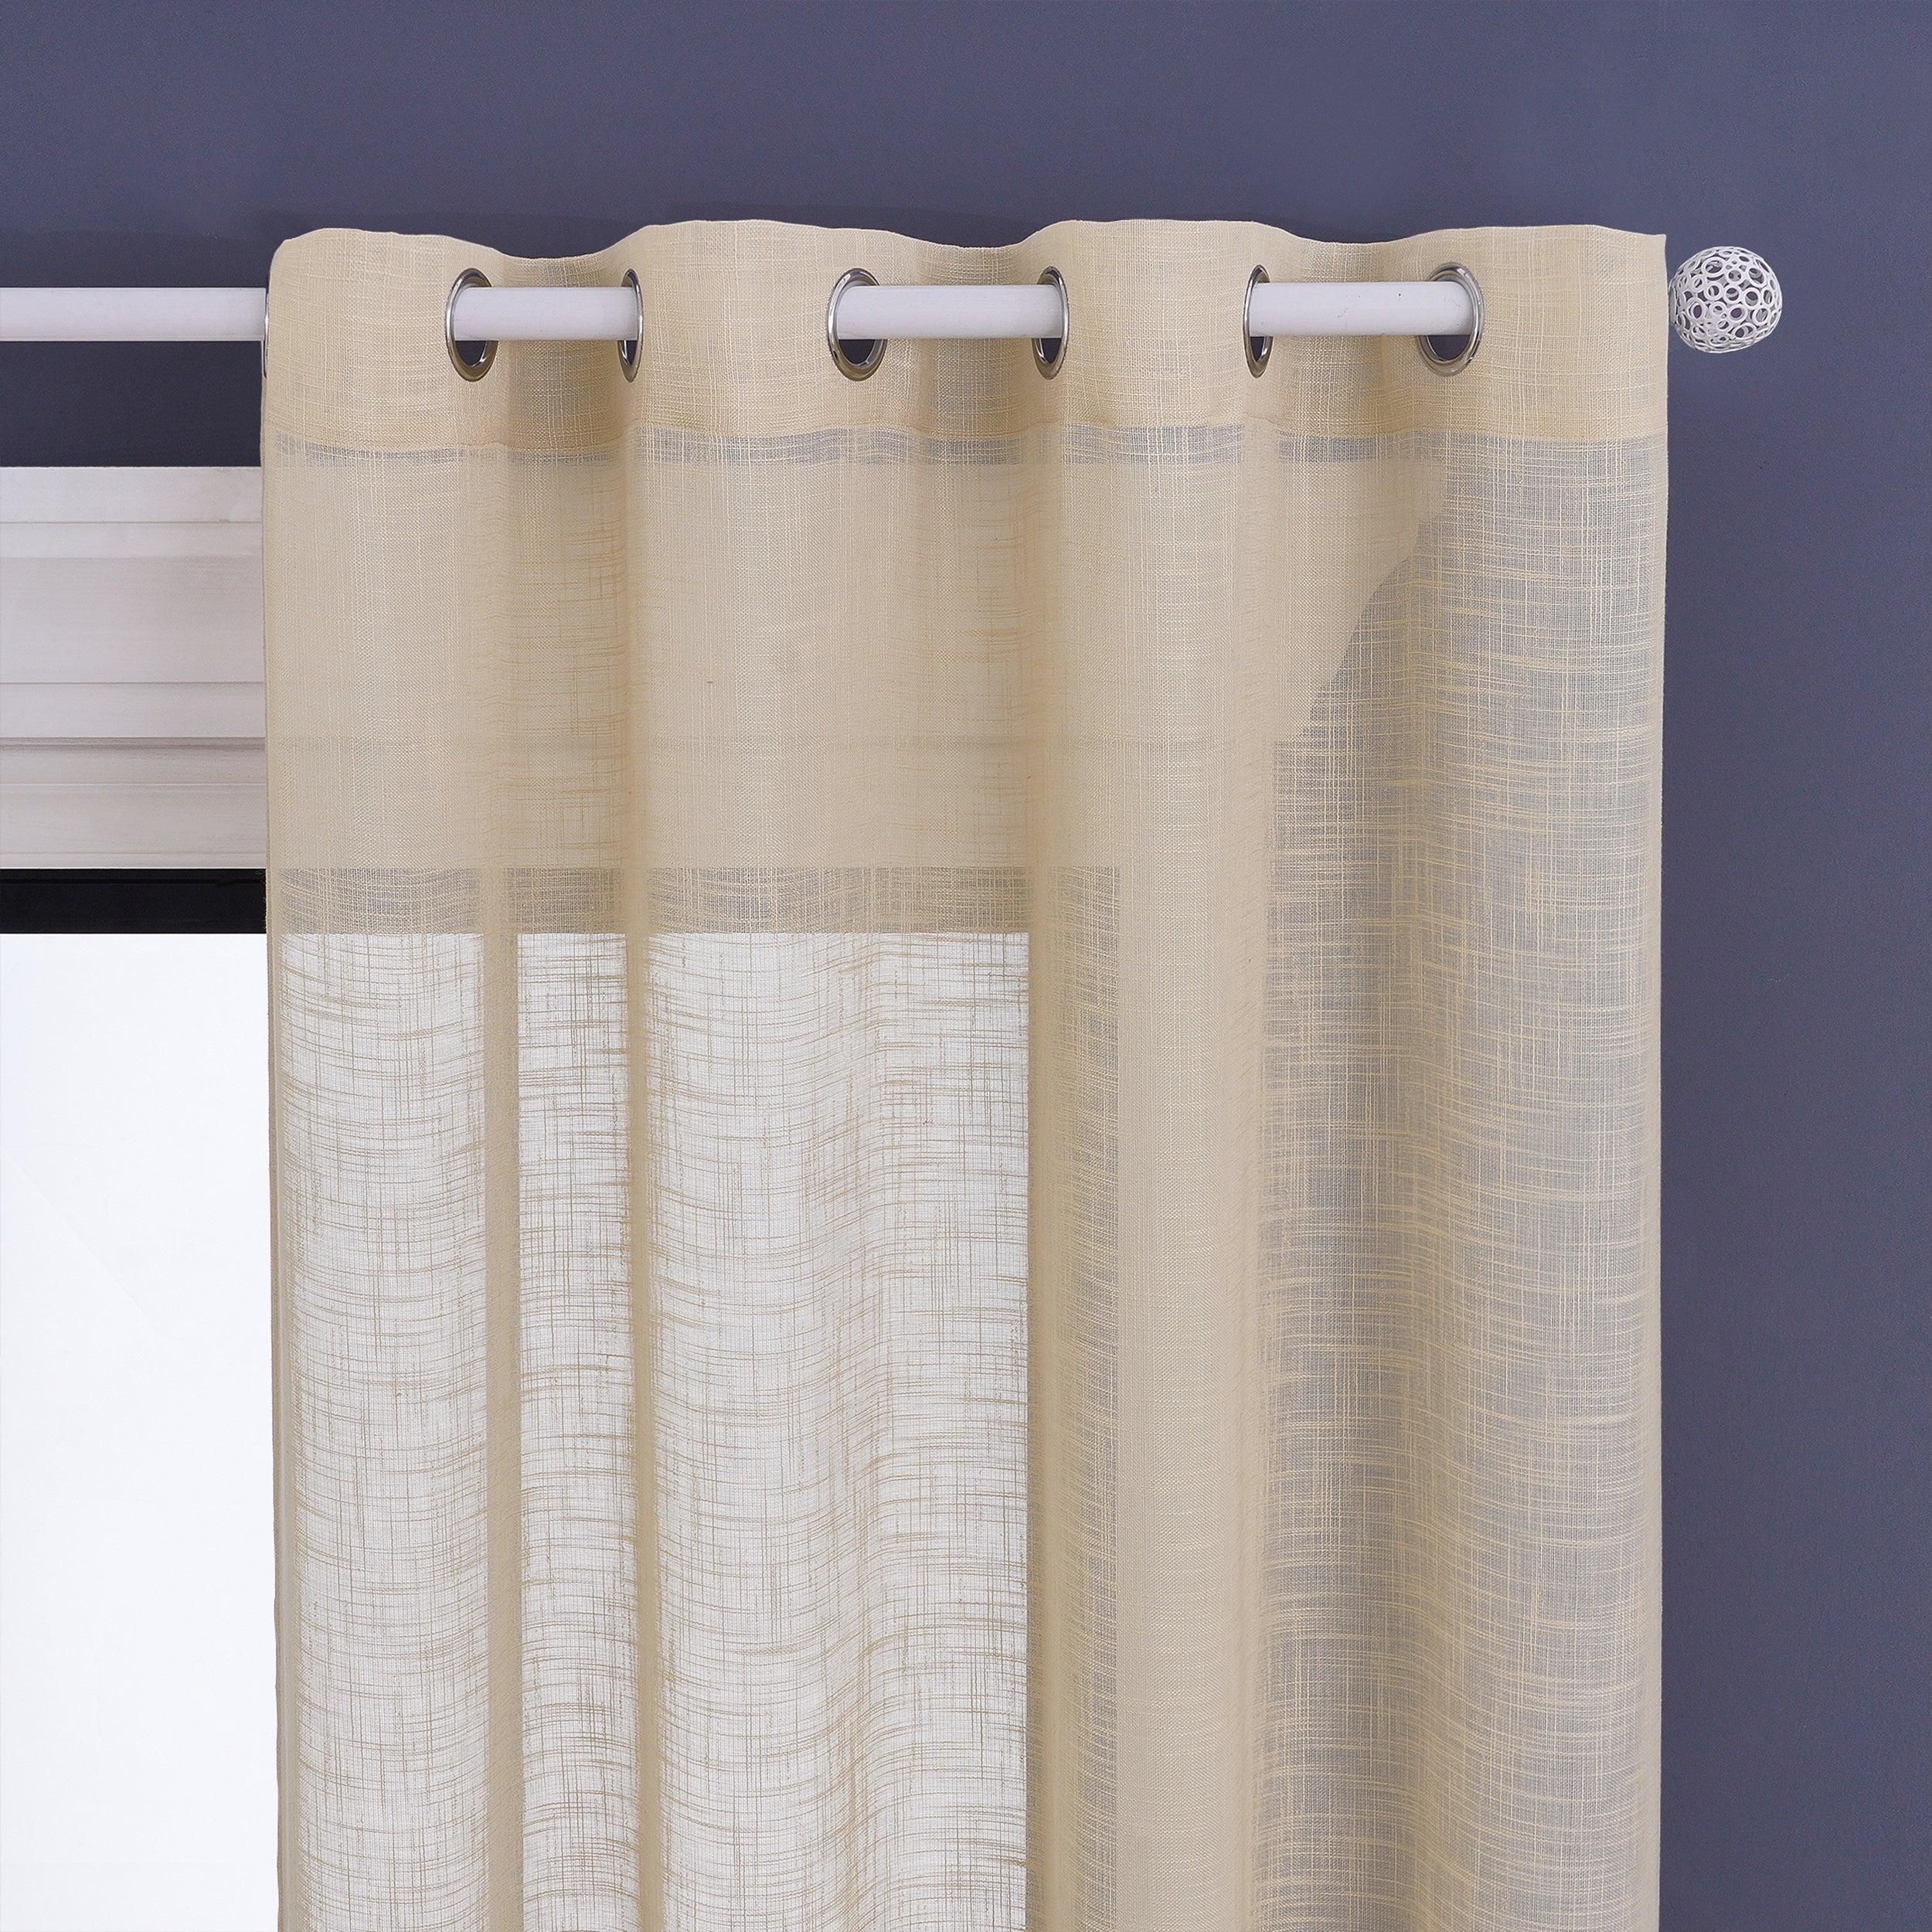 Size Customization -Voile White Linen Curtains With Eyelets For Home,Bedroom,1 Panel - Topfinel